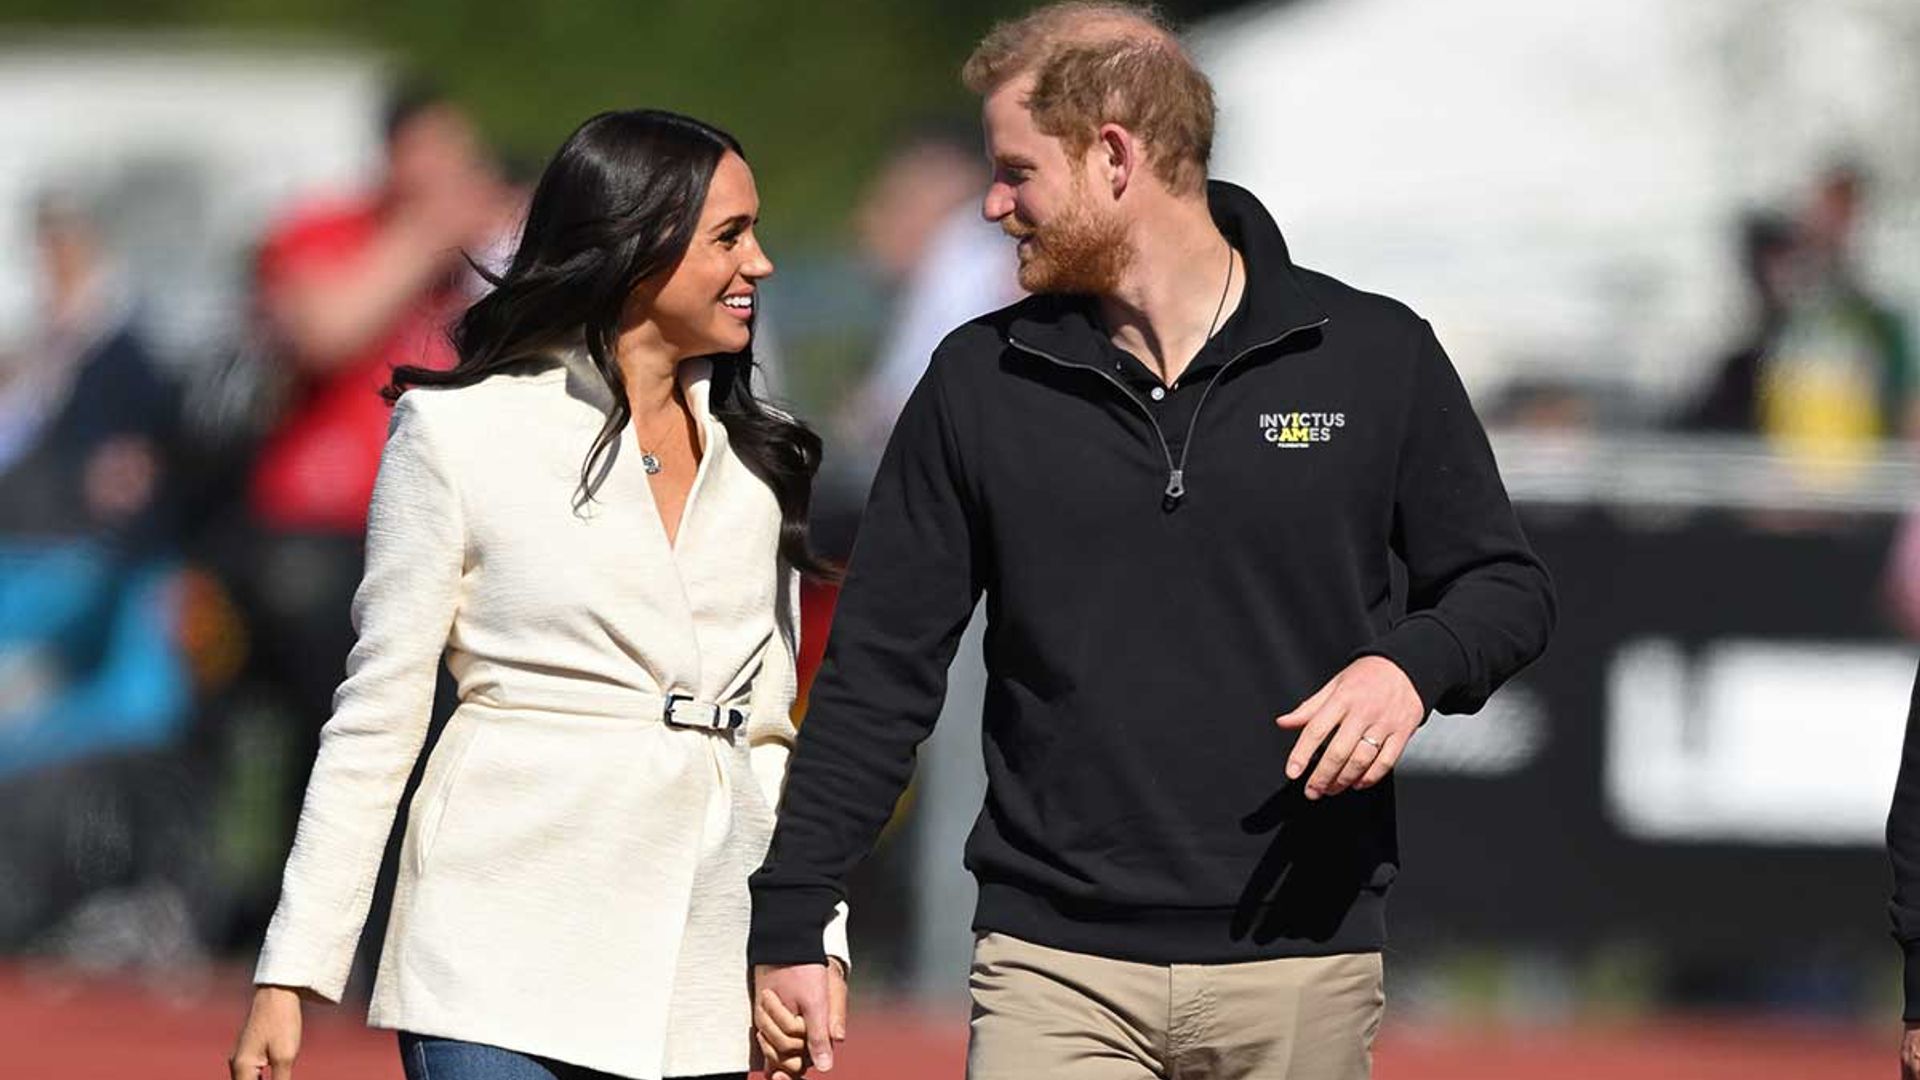 Prince Harry's first thoughts about future wife Meghan Markle revealed